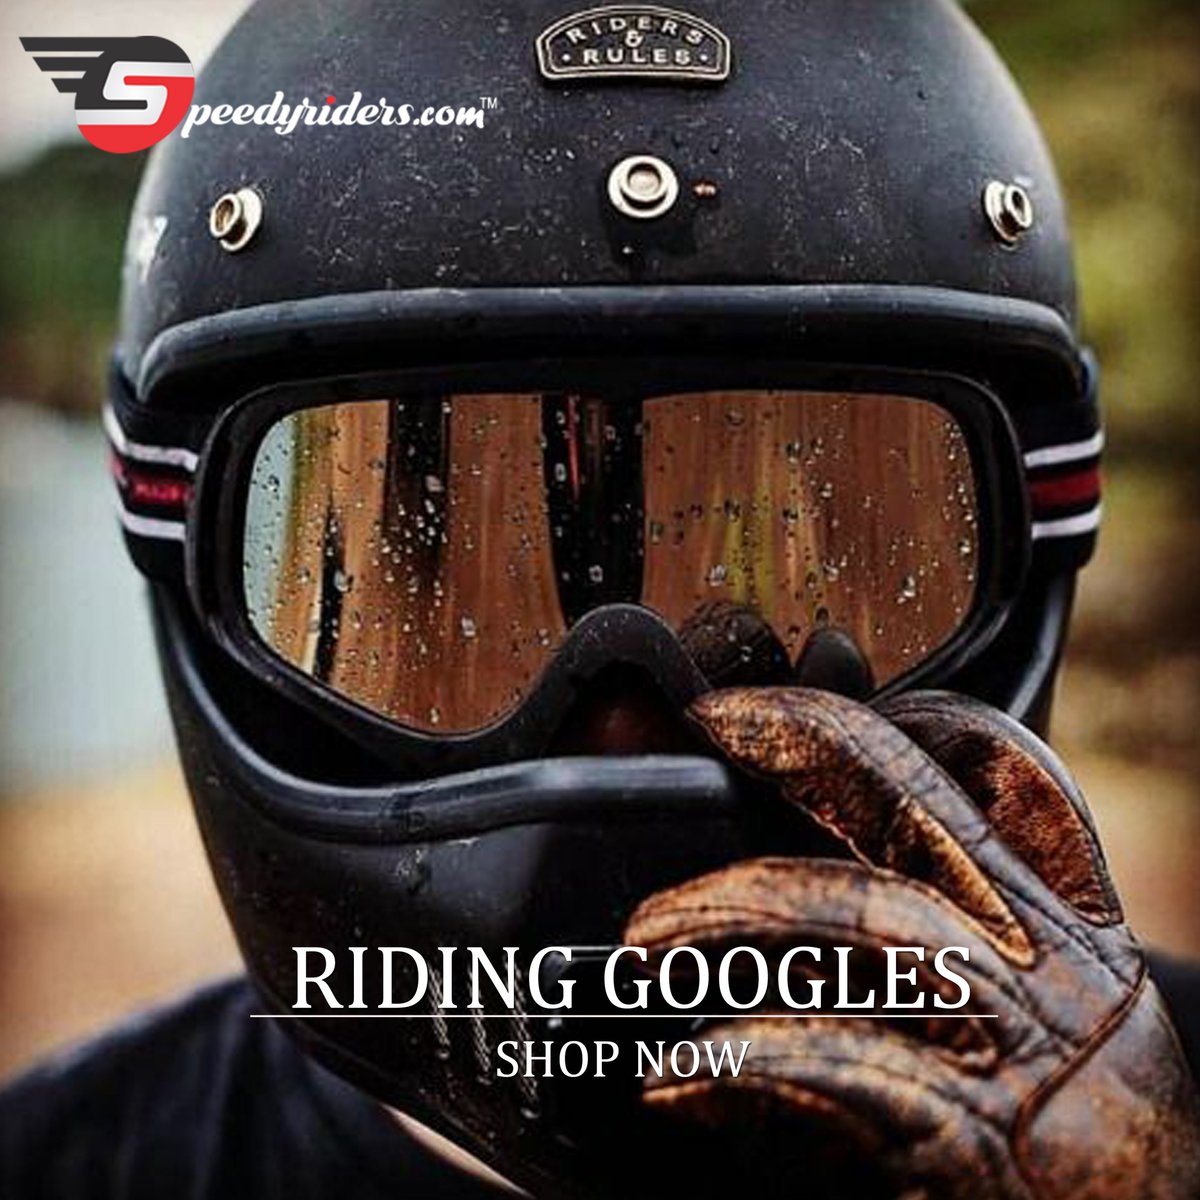 Keep Calm and Put your Goggles On.
Shop Now-bit.ly/2vf43il
#Rider #Riding #BikeLagguards #Royalenfield #BikeAccessories #RoyalenfieldAccessories #BikeGloves #Gloves #RidingGoggles